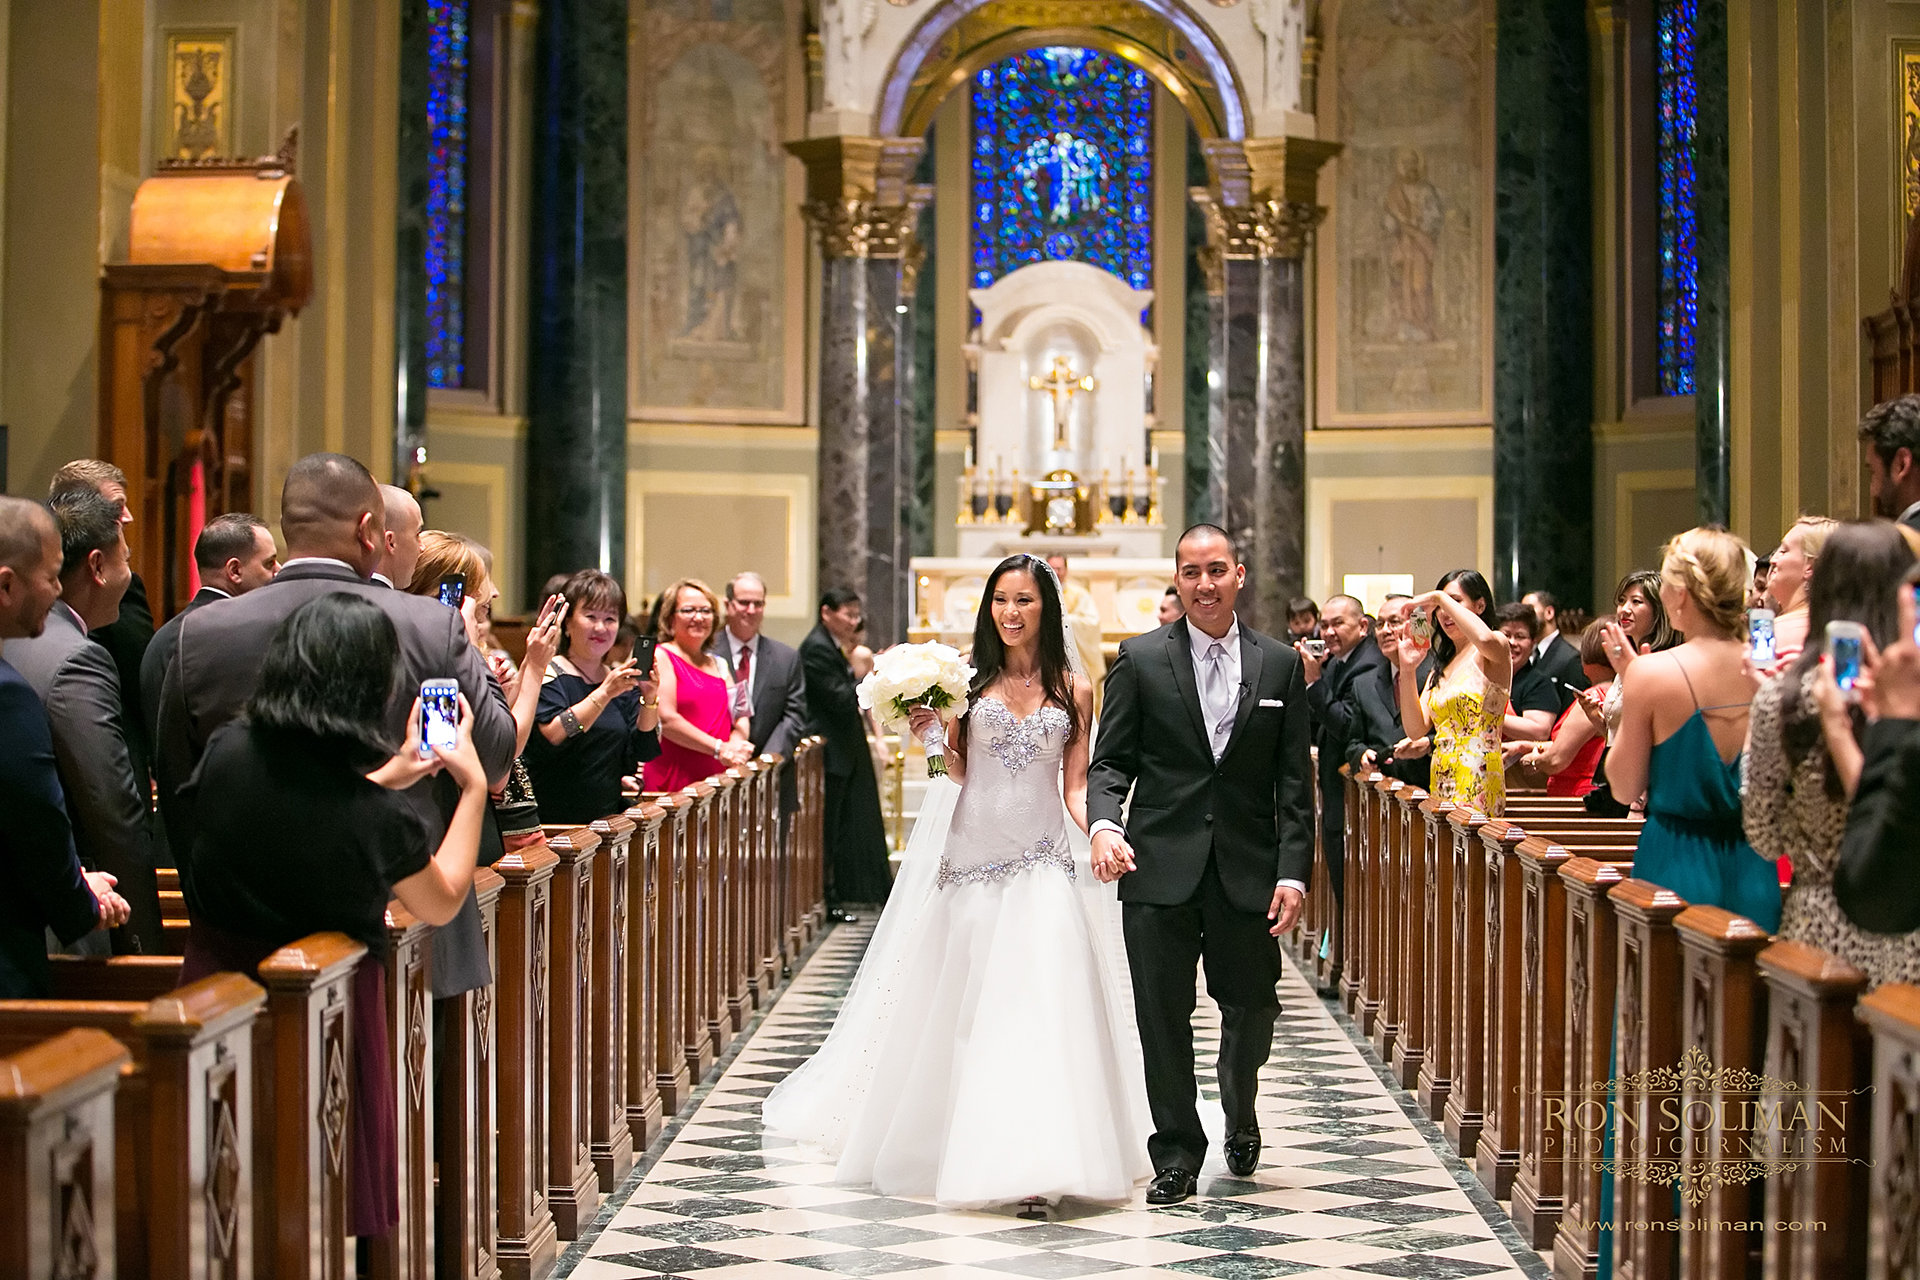  Cathedral Basilica of Sts. Peter and Paul wedding